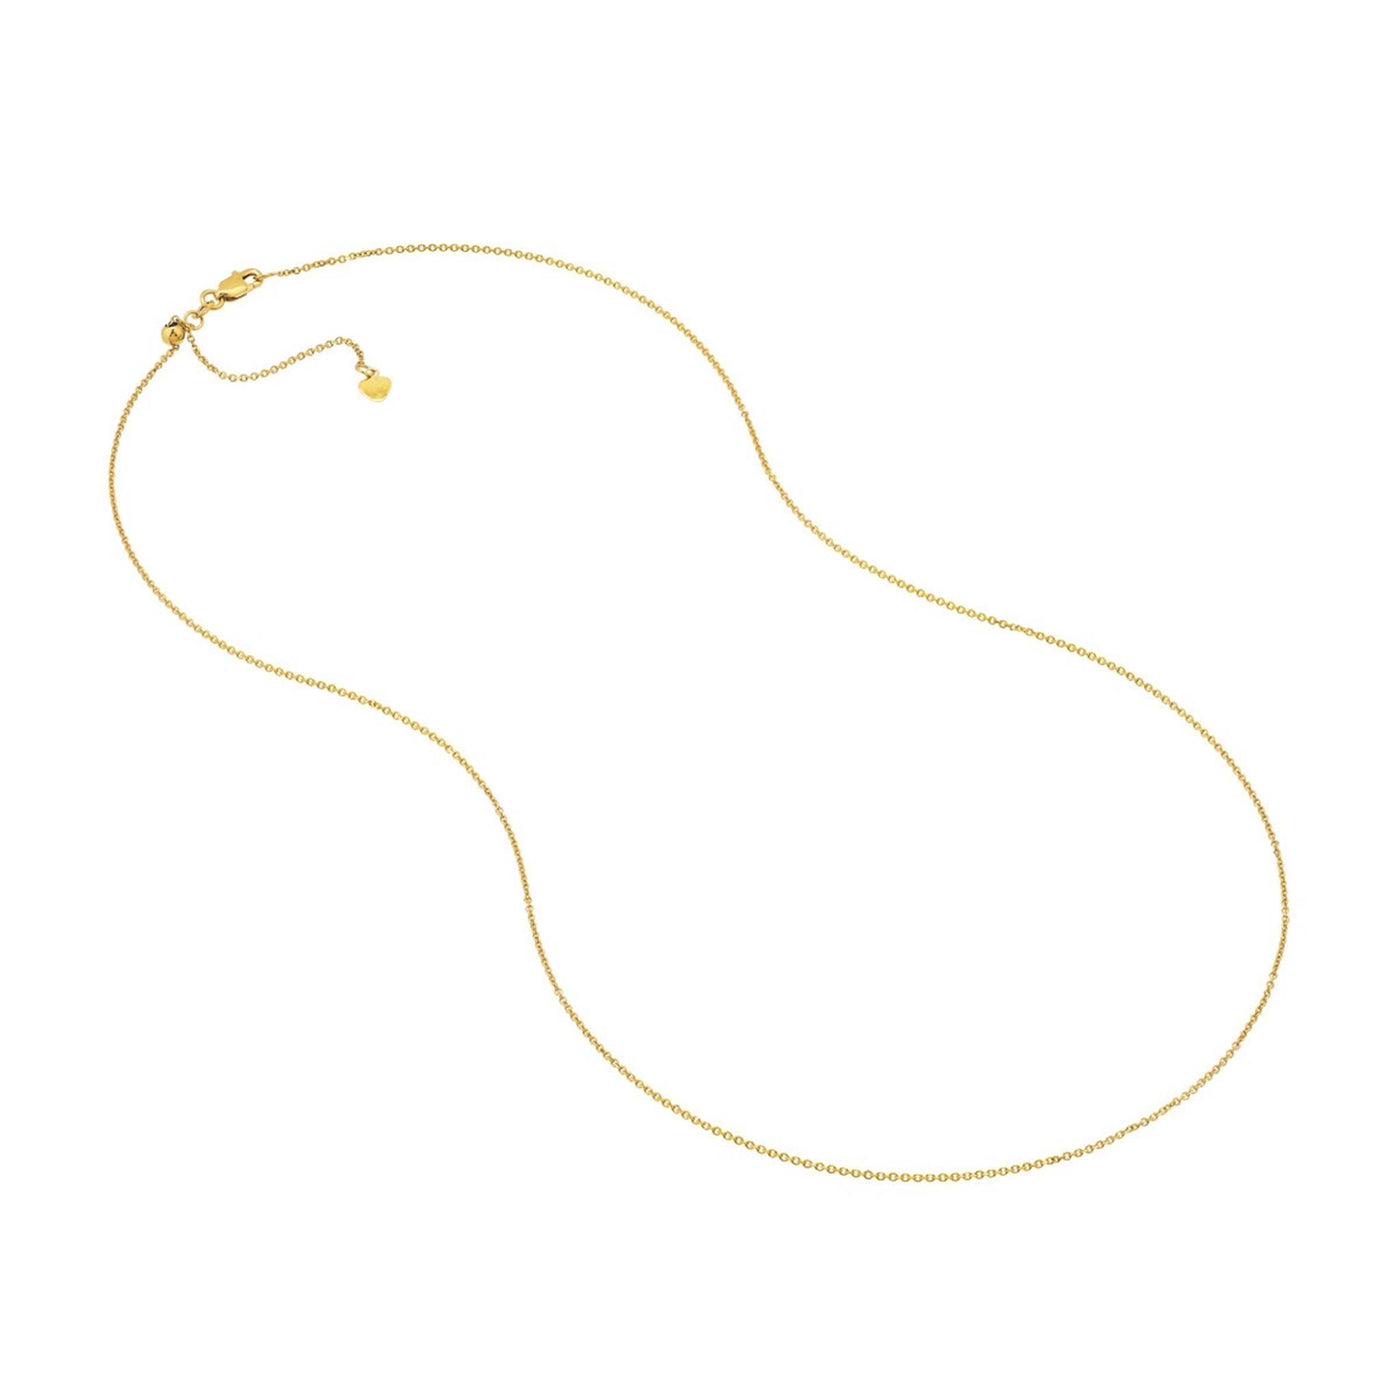 14K Yellow Gold 1.05mm 22" Adjustable Cable Link Chain